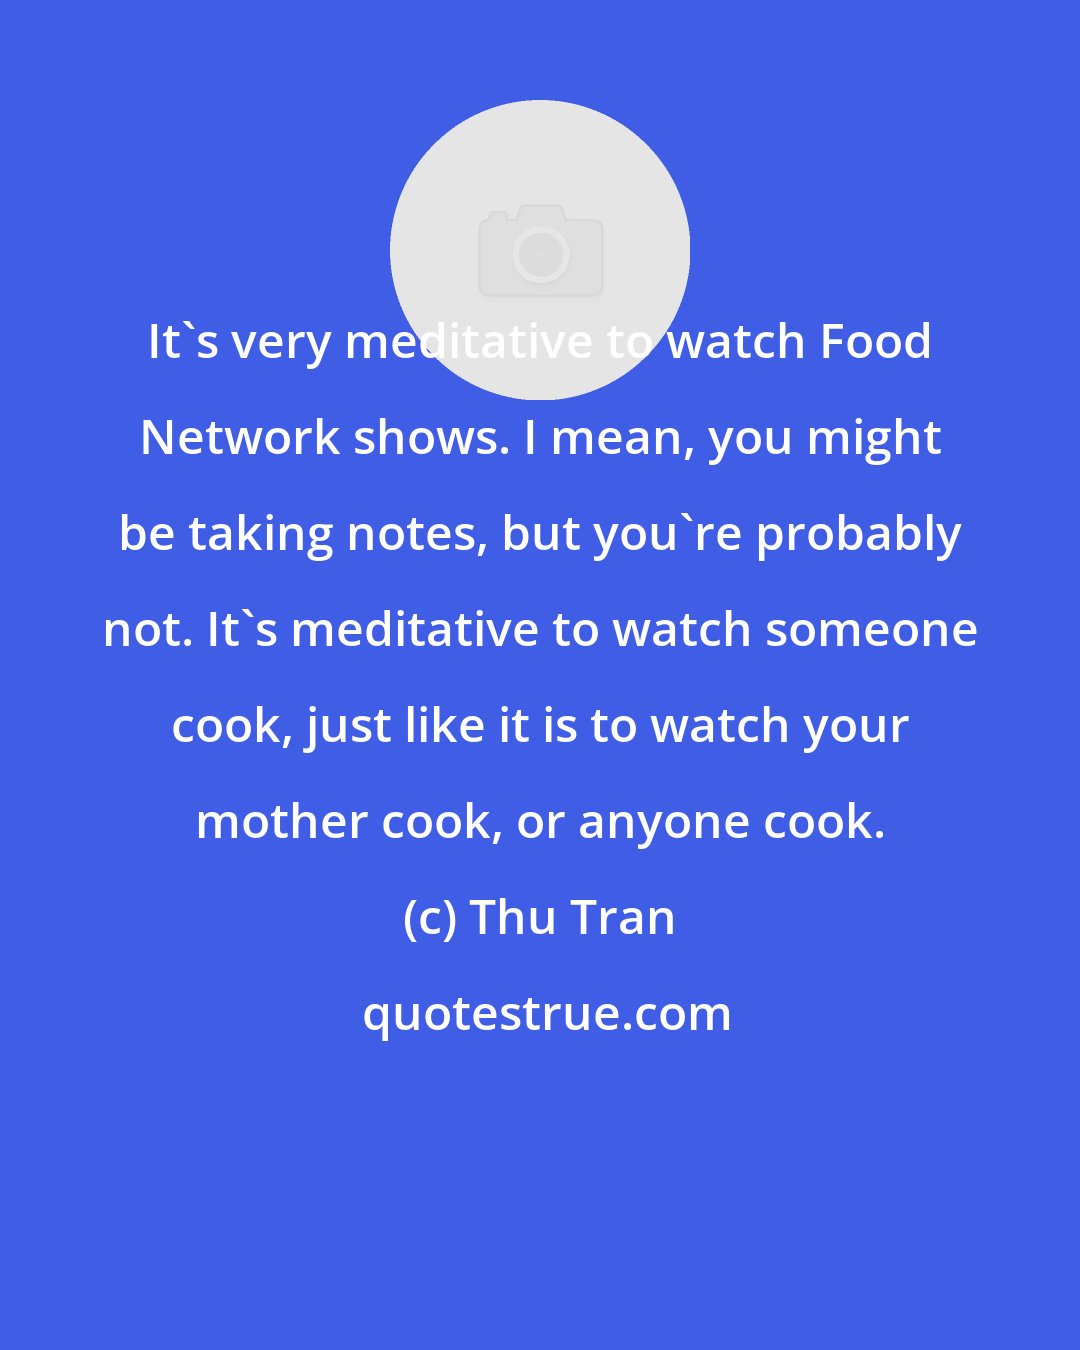 Thu Tran: It's very meditative to watch Food Network shows. I mean, you might be taking notes, but you're probably not. It's meditative to watch someone cook, just like it is to watch your mother cook, or anyone cook.